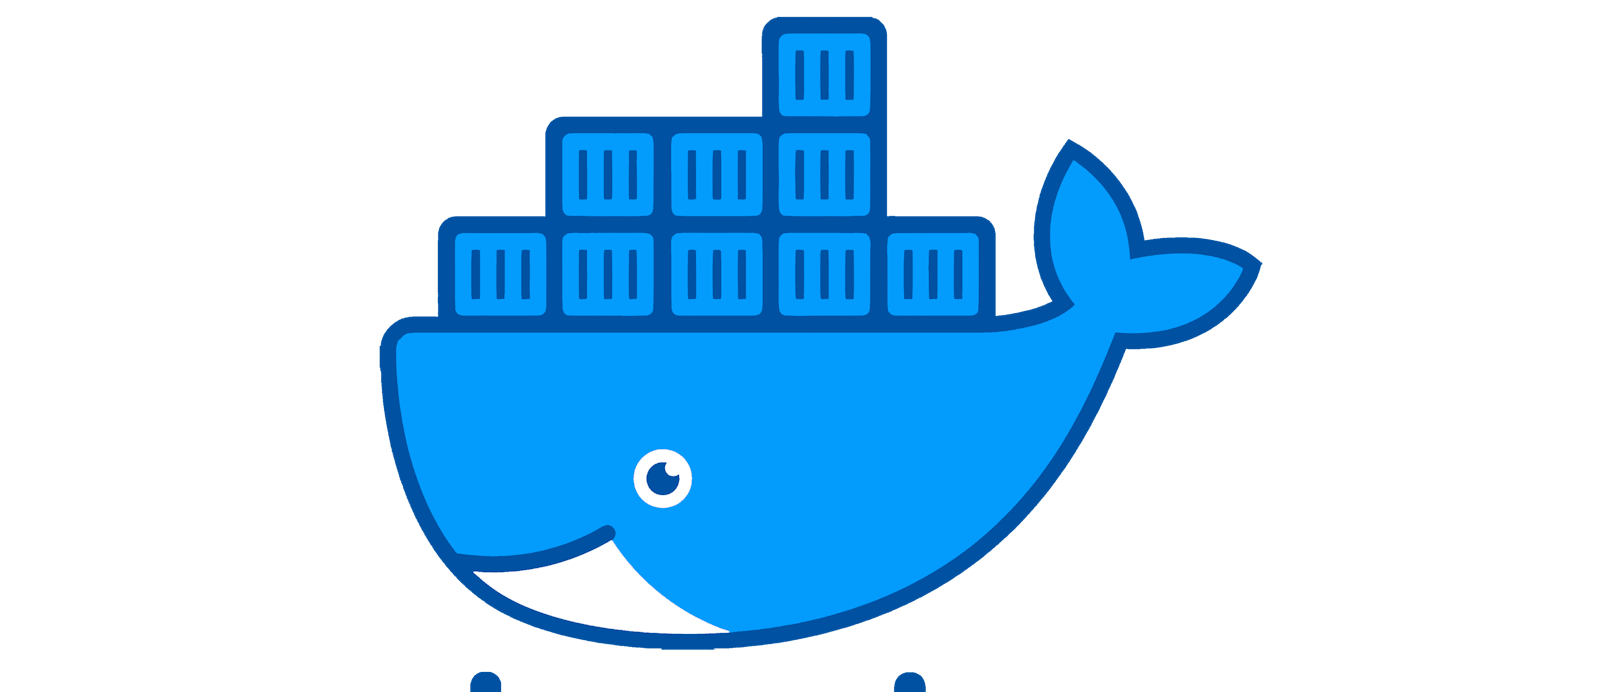 Containerization with Docker